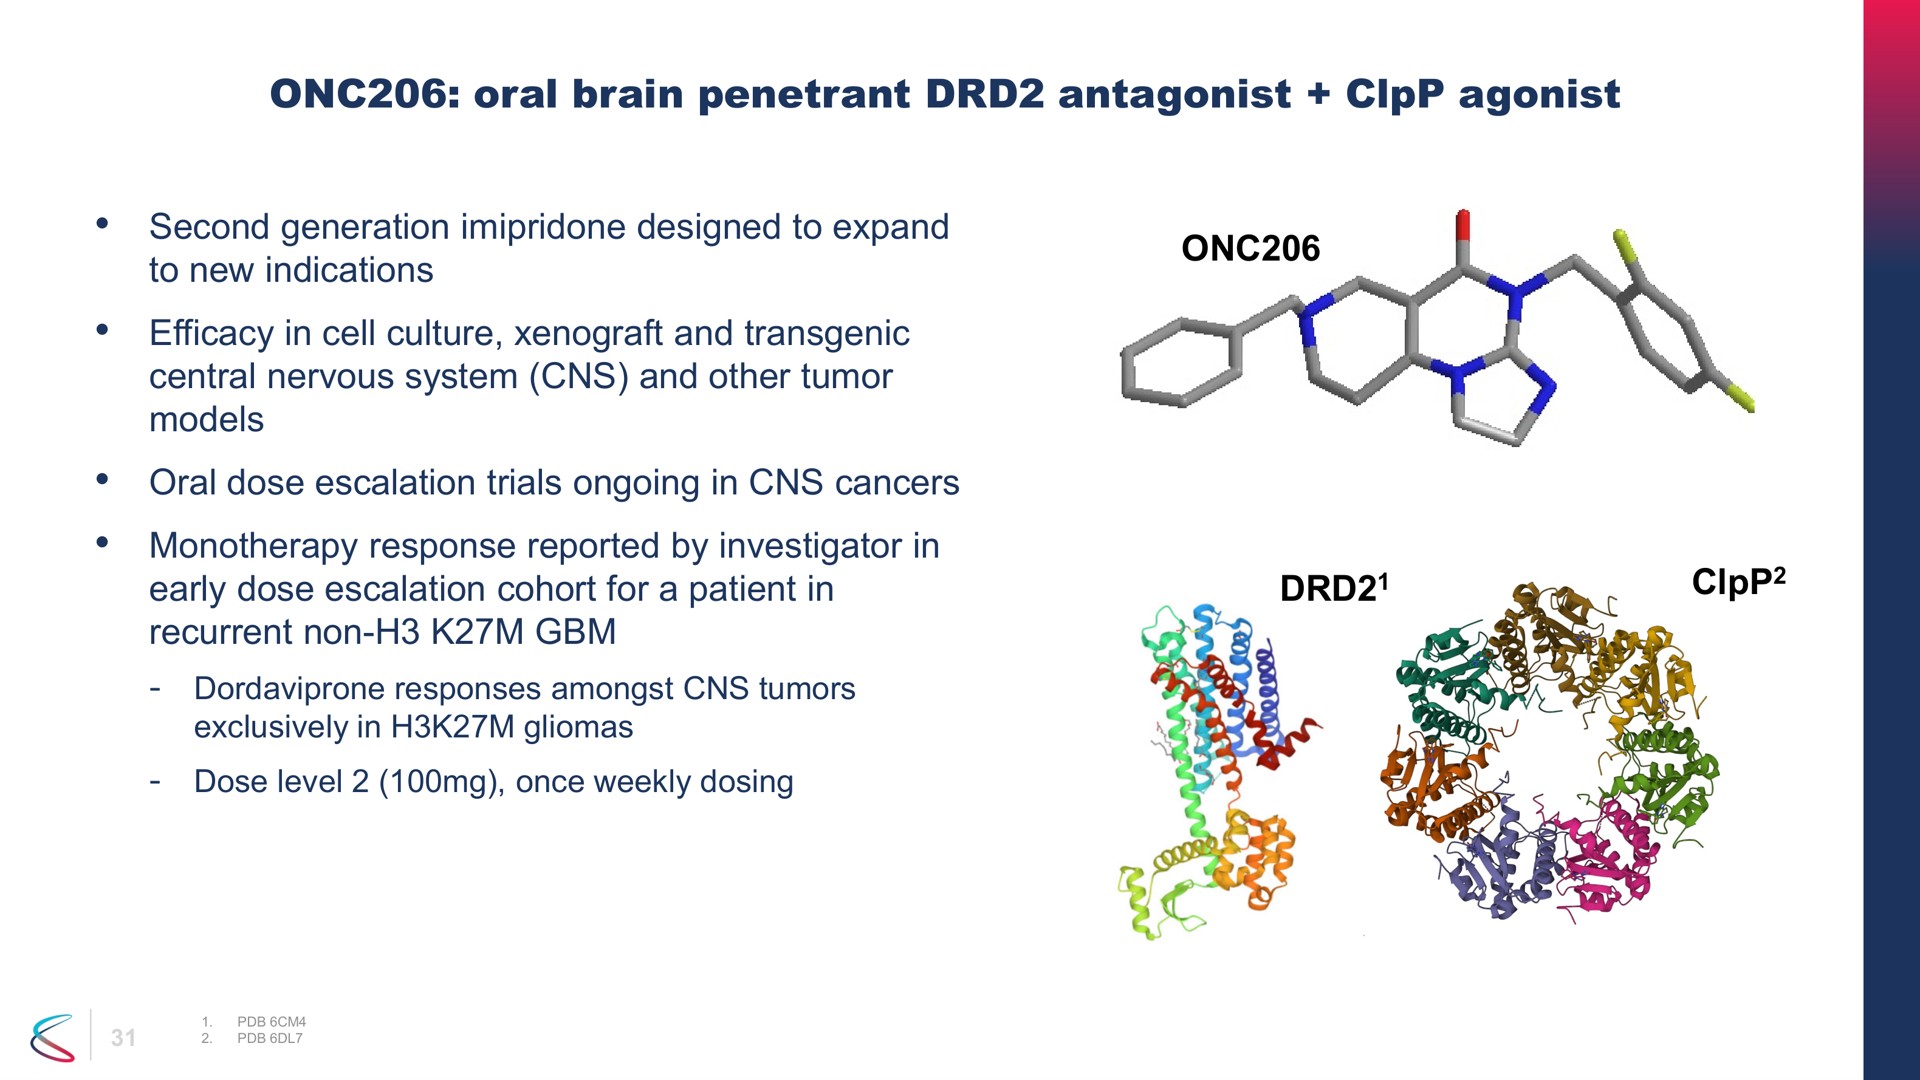 oral brain penetrant antagonist agonist second generation designed to expand to new indications efficacy in cell culture and central nervous system and other tumor models oral dose trials ongoing in cancers response reported by investigator in early dose cohort for a patient in recurrent non | Chimerix